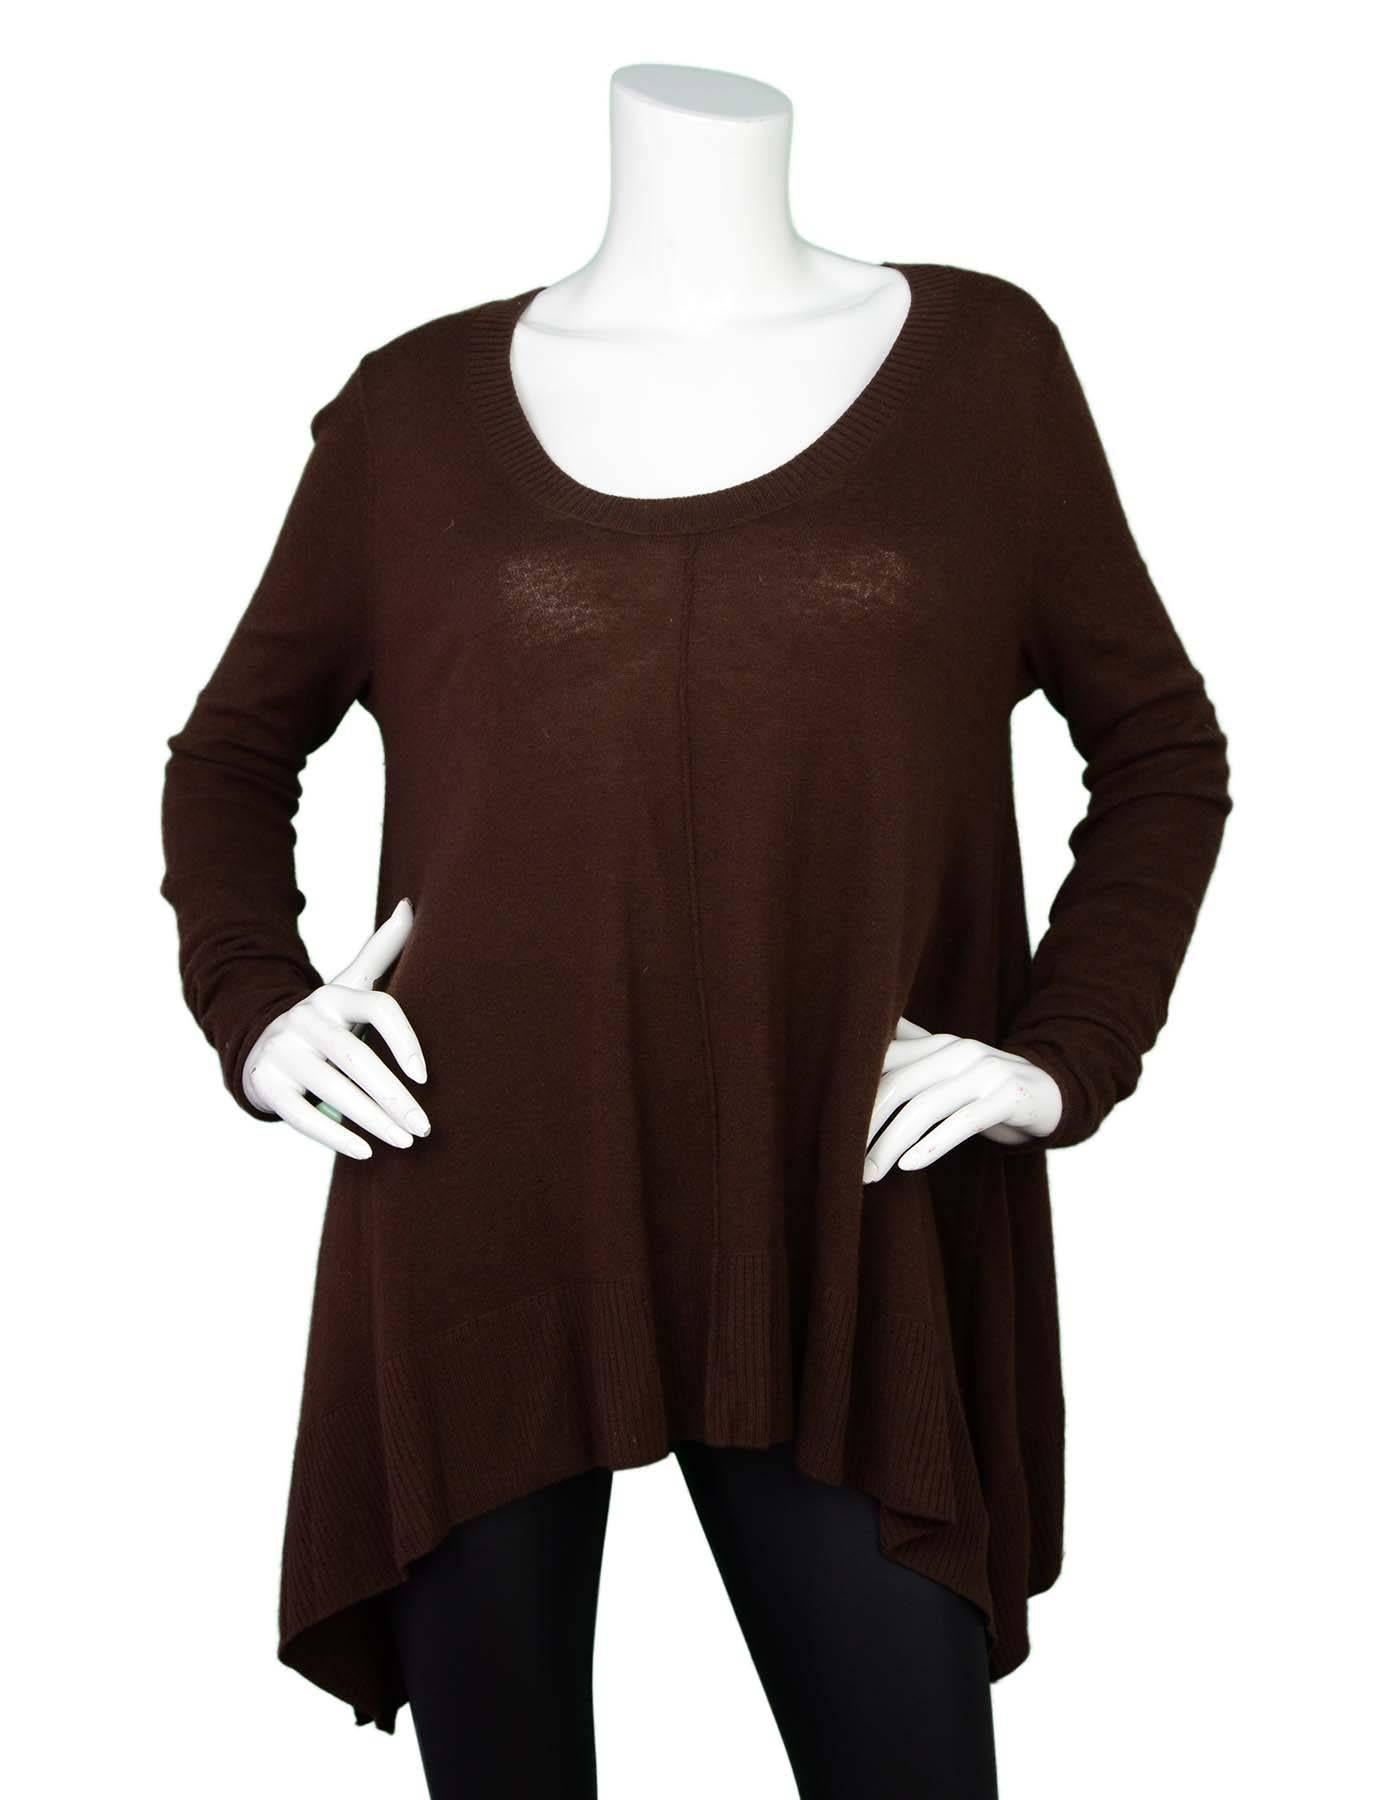 Donna Karan Brown Wool Sweater Sz S

Made In: China
Color: Brown
Composition: 70% Wool, 30% Cashmere
Lining: None
Closure/Opening: Pull-over
Overall Condition: Very good pre-owned condition with the exception of light pilling